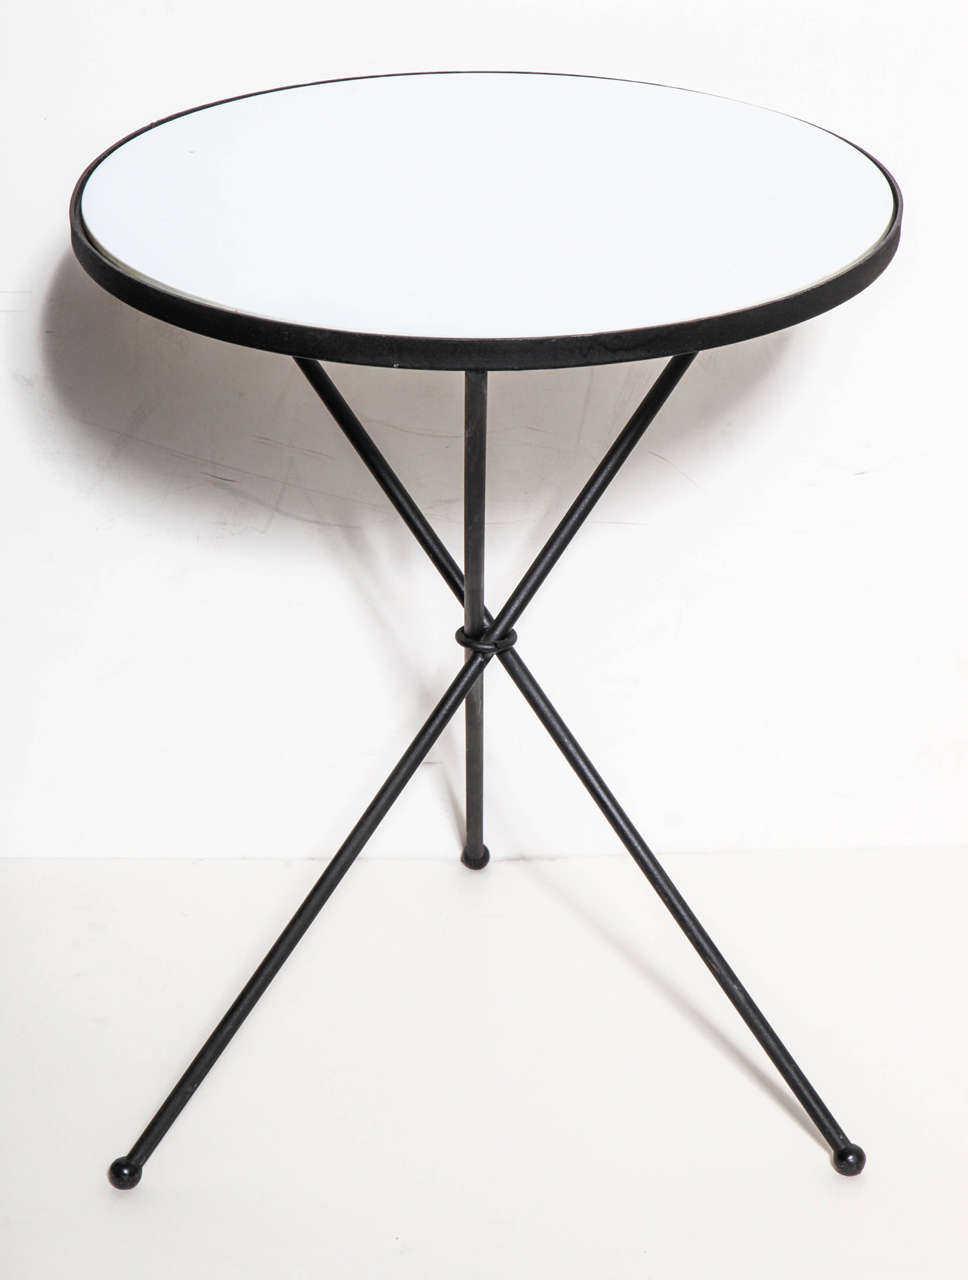 Mid Century California Modern White Vitrolite and Black Wrought Iron Tripod Table.  Featuring a Black ring center, ball feet, a round durable White Vitrolite Top encircled within a rimmed Black painted Wrought Iron frame.  Versatile, Indoor Outdoor